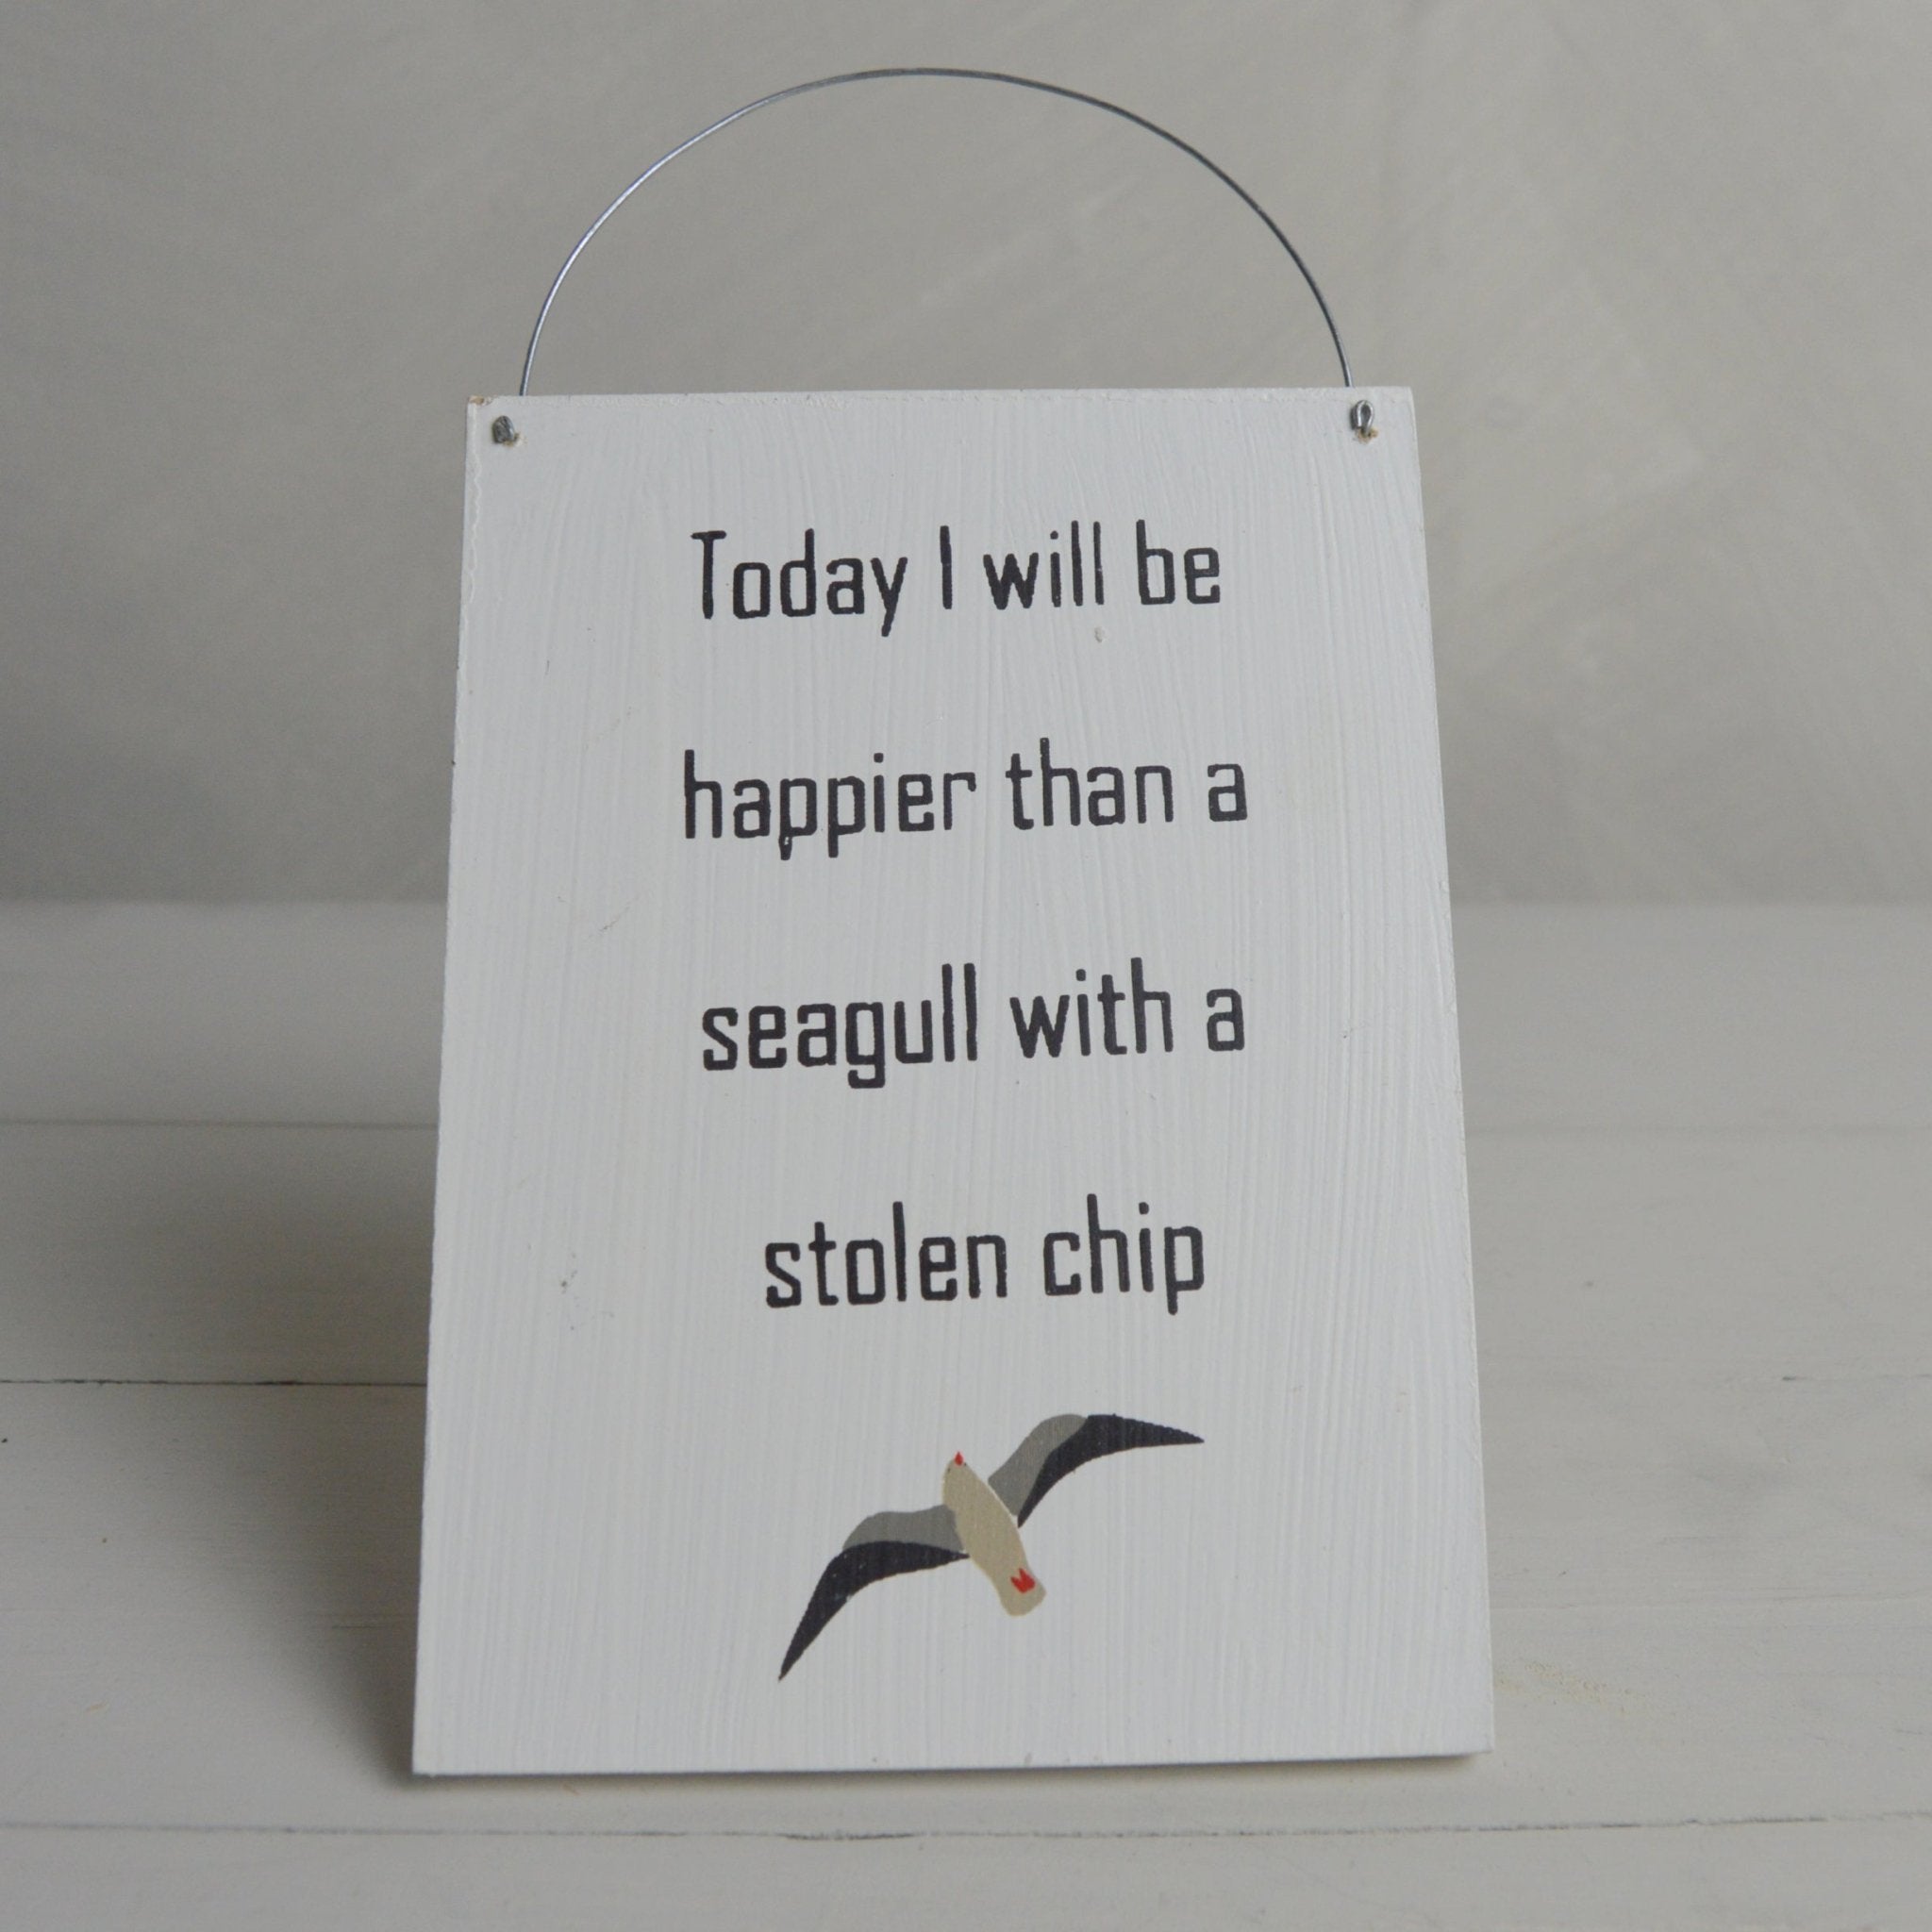 Happier Than a Seagull With a Stolen Chip Decoration - The Nancy Smillie Shop - Art, Jewellery & Designer Gifts Glasgow